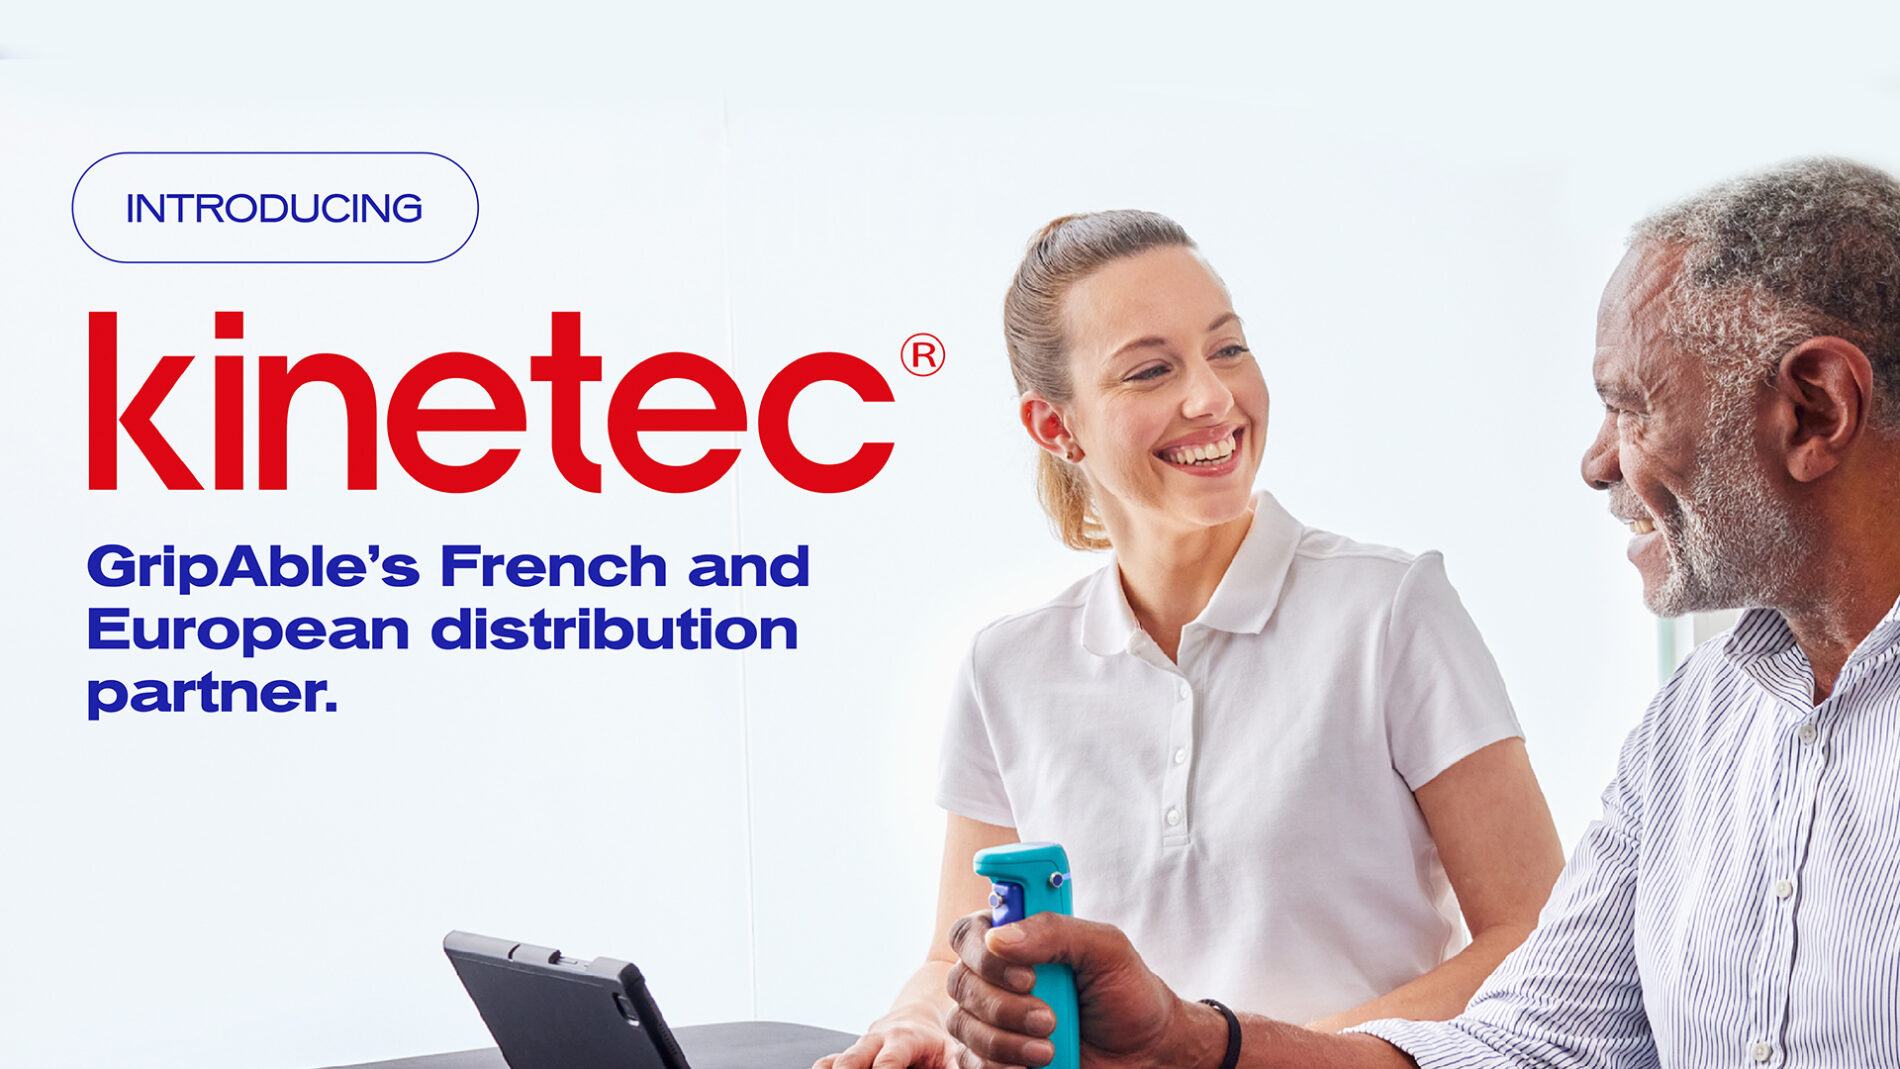 Kinetec - GripAble's French and European distribution partner